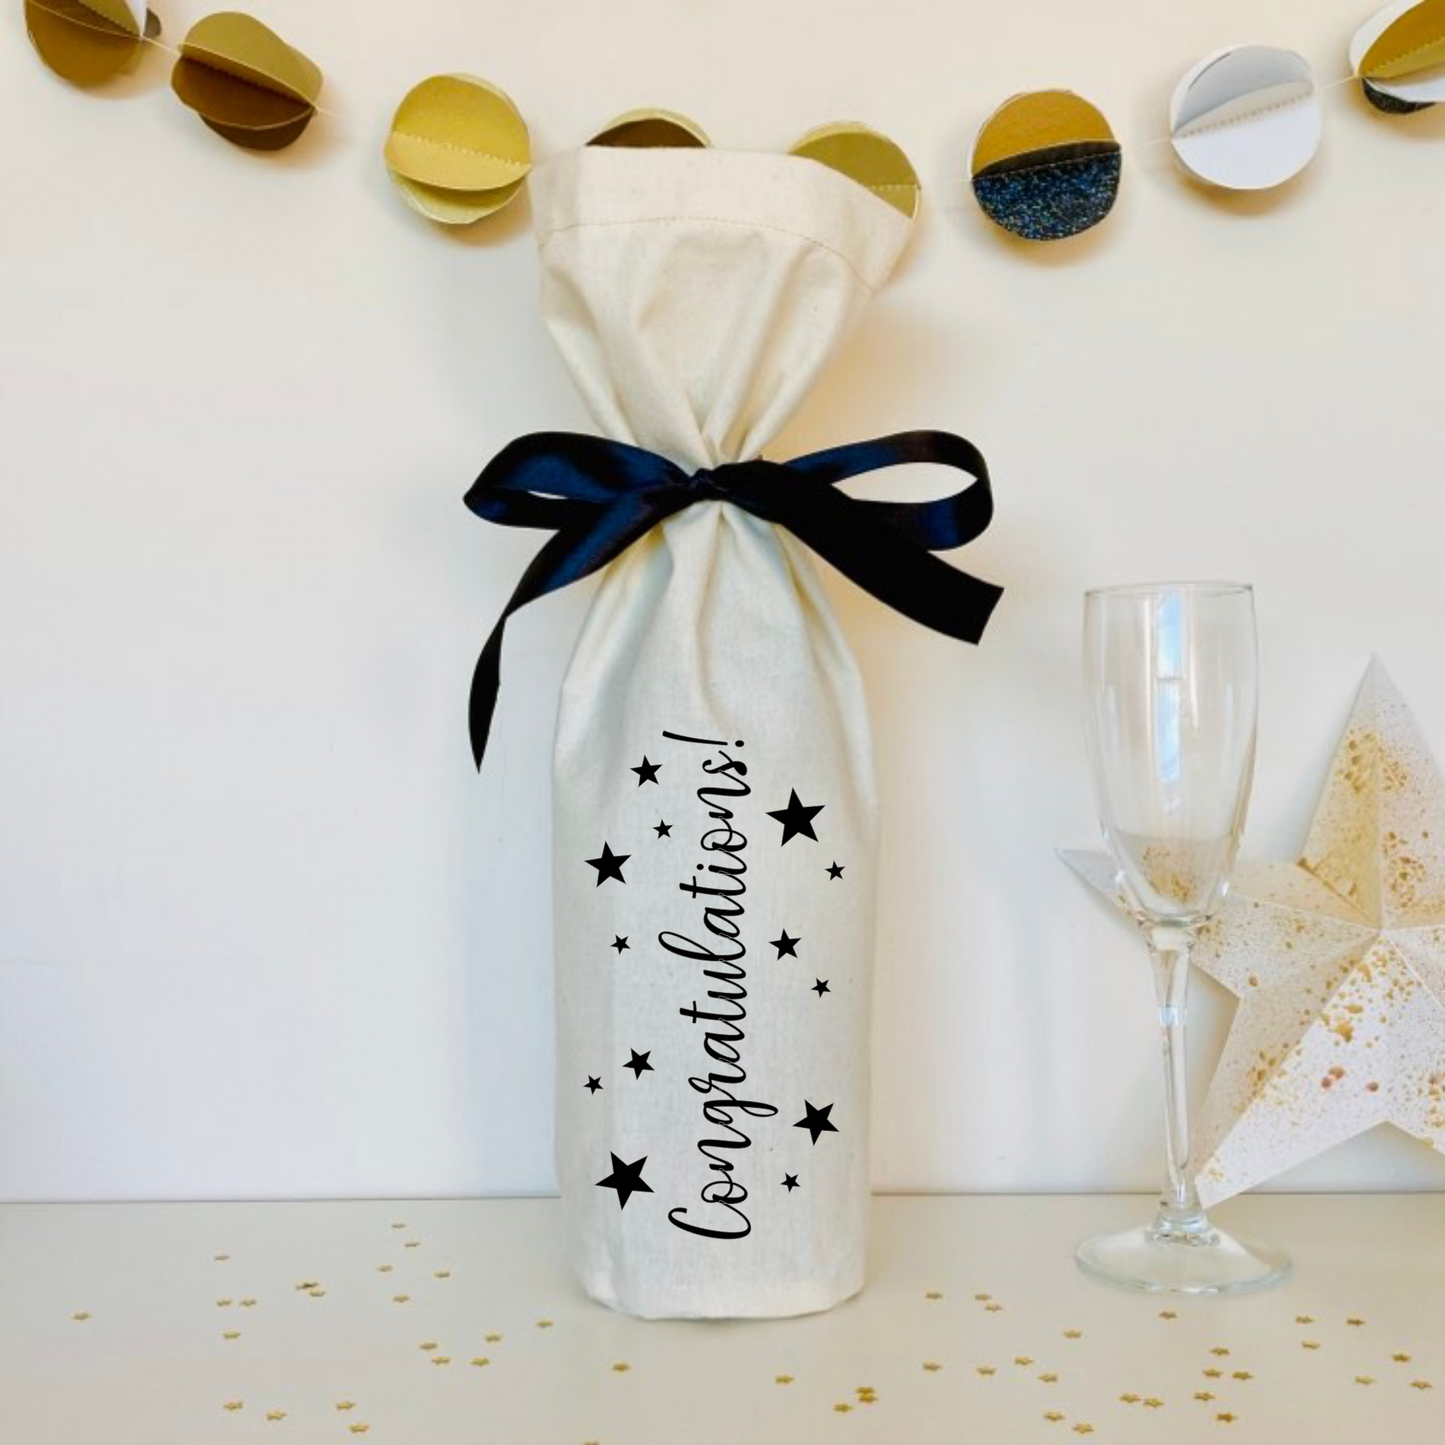 a calico bottle bag printed with Congratulations! and decorated with stars. Tied with a black satin ribbon